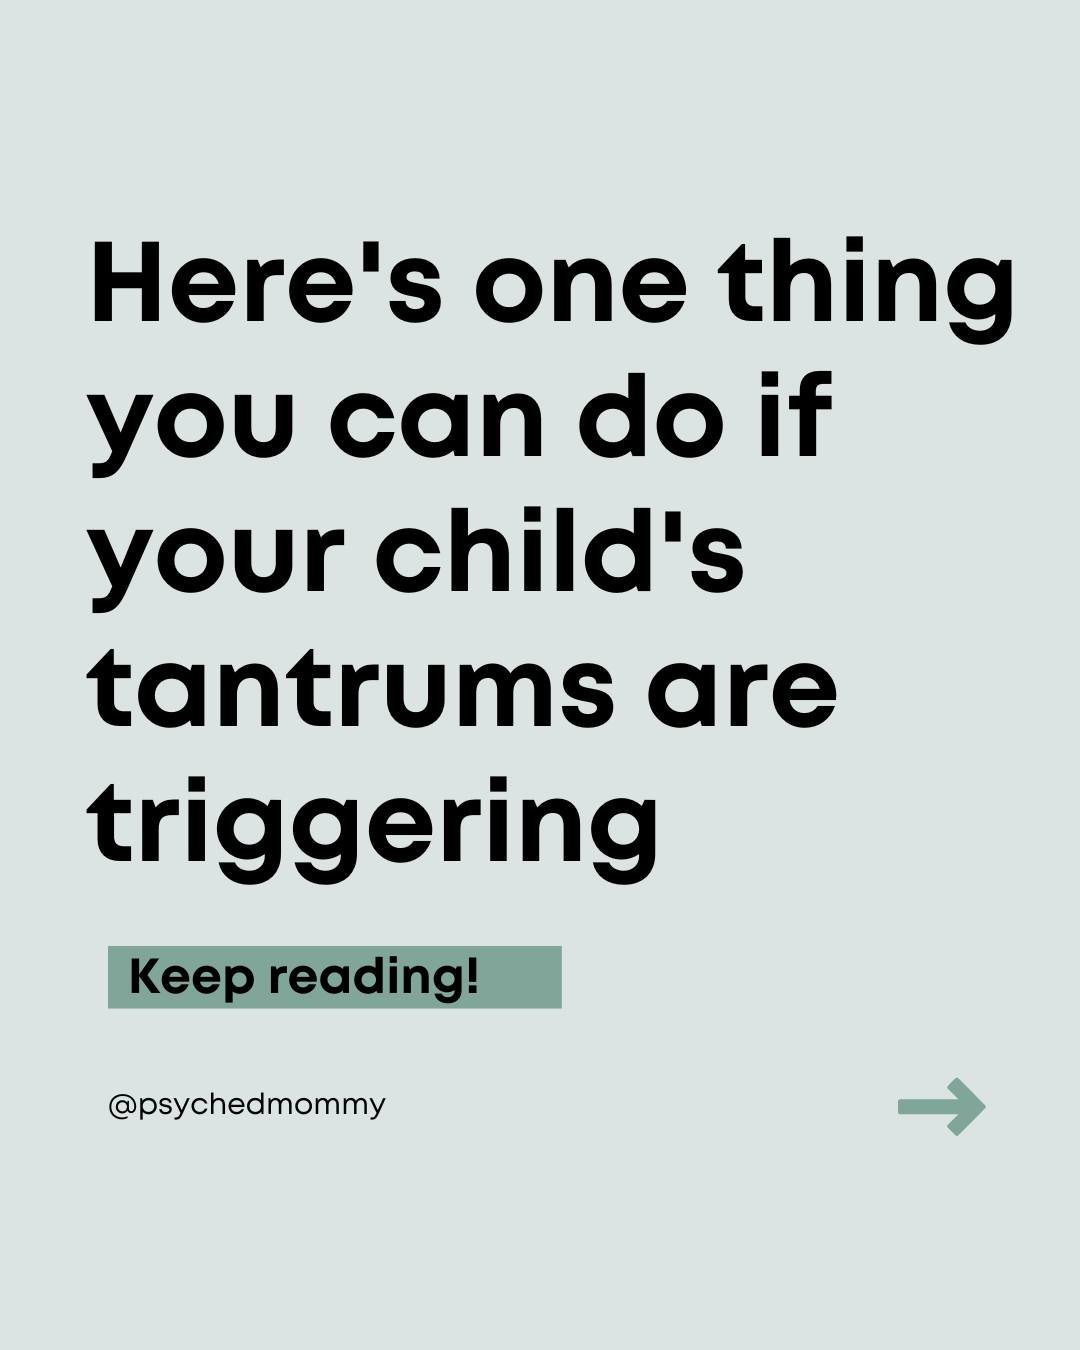 MOM TRUTH: Tantrums are triggering 😵&zwj;💫

Tantrums can really activate us. When this happens, the logical parts of our brain shuts down. And what we&rsquo;re left with is the emotional, fight-flight-freeze parts. Without support from our rational